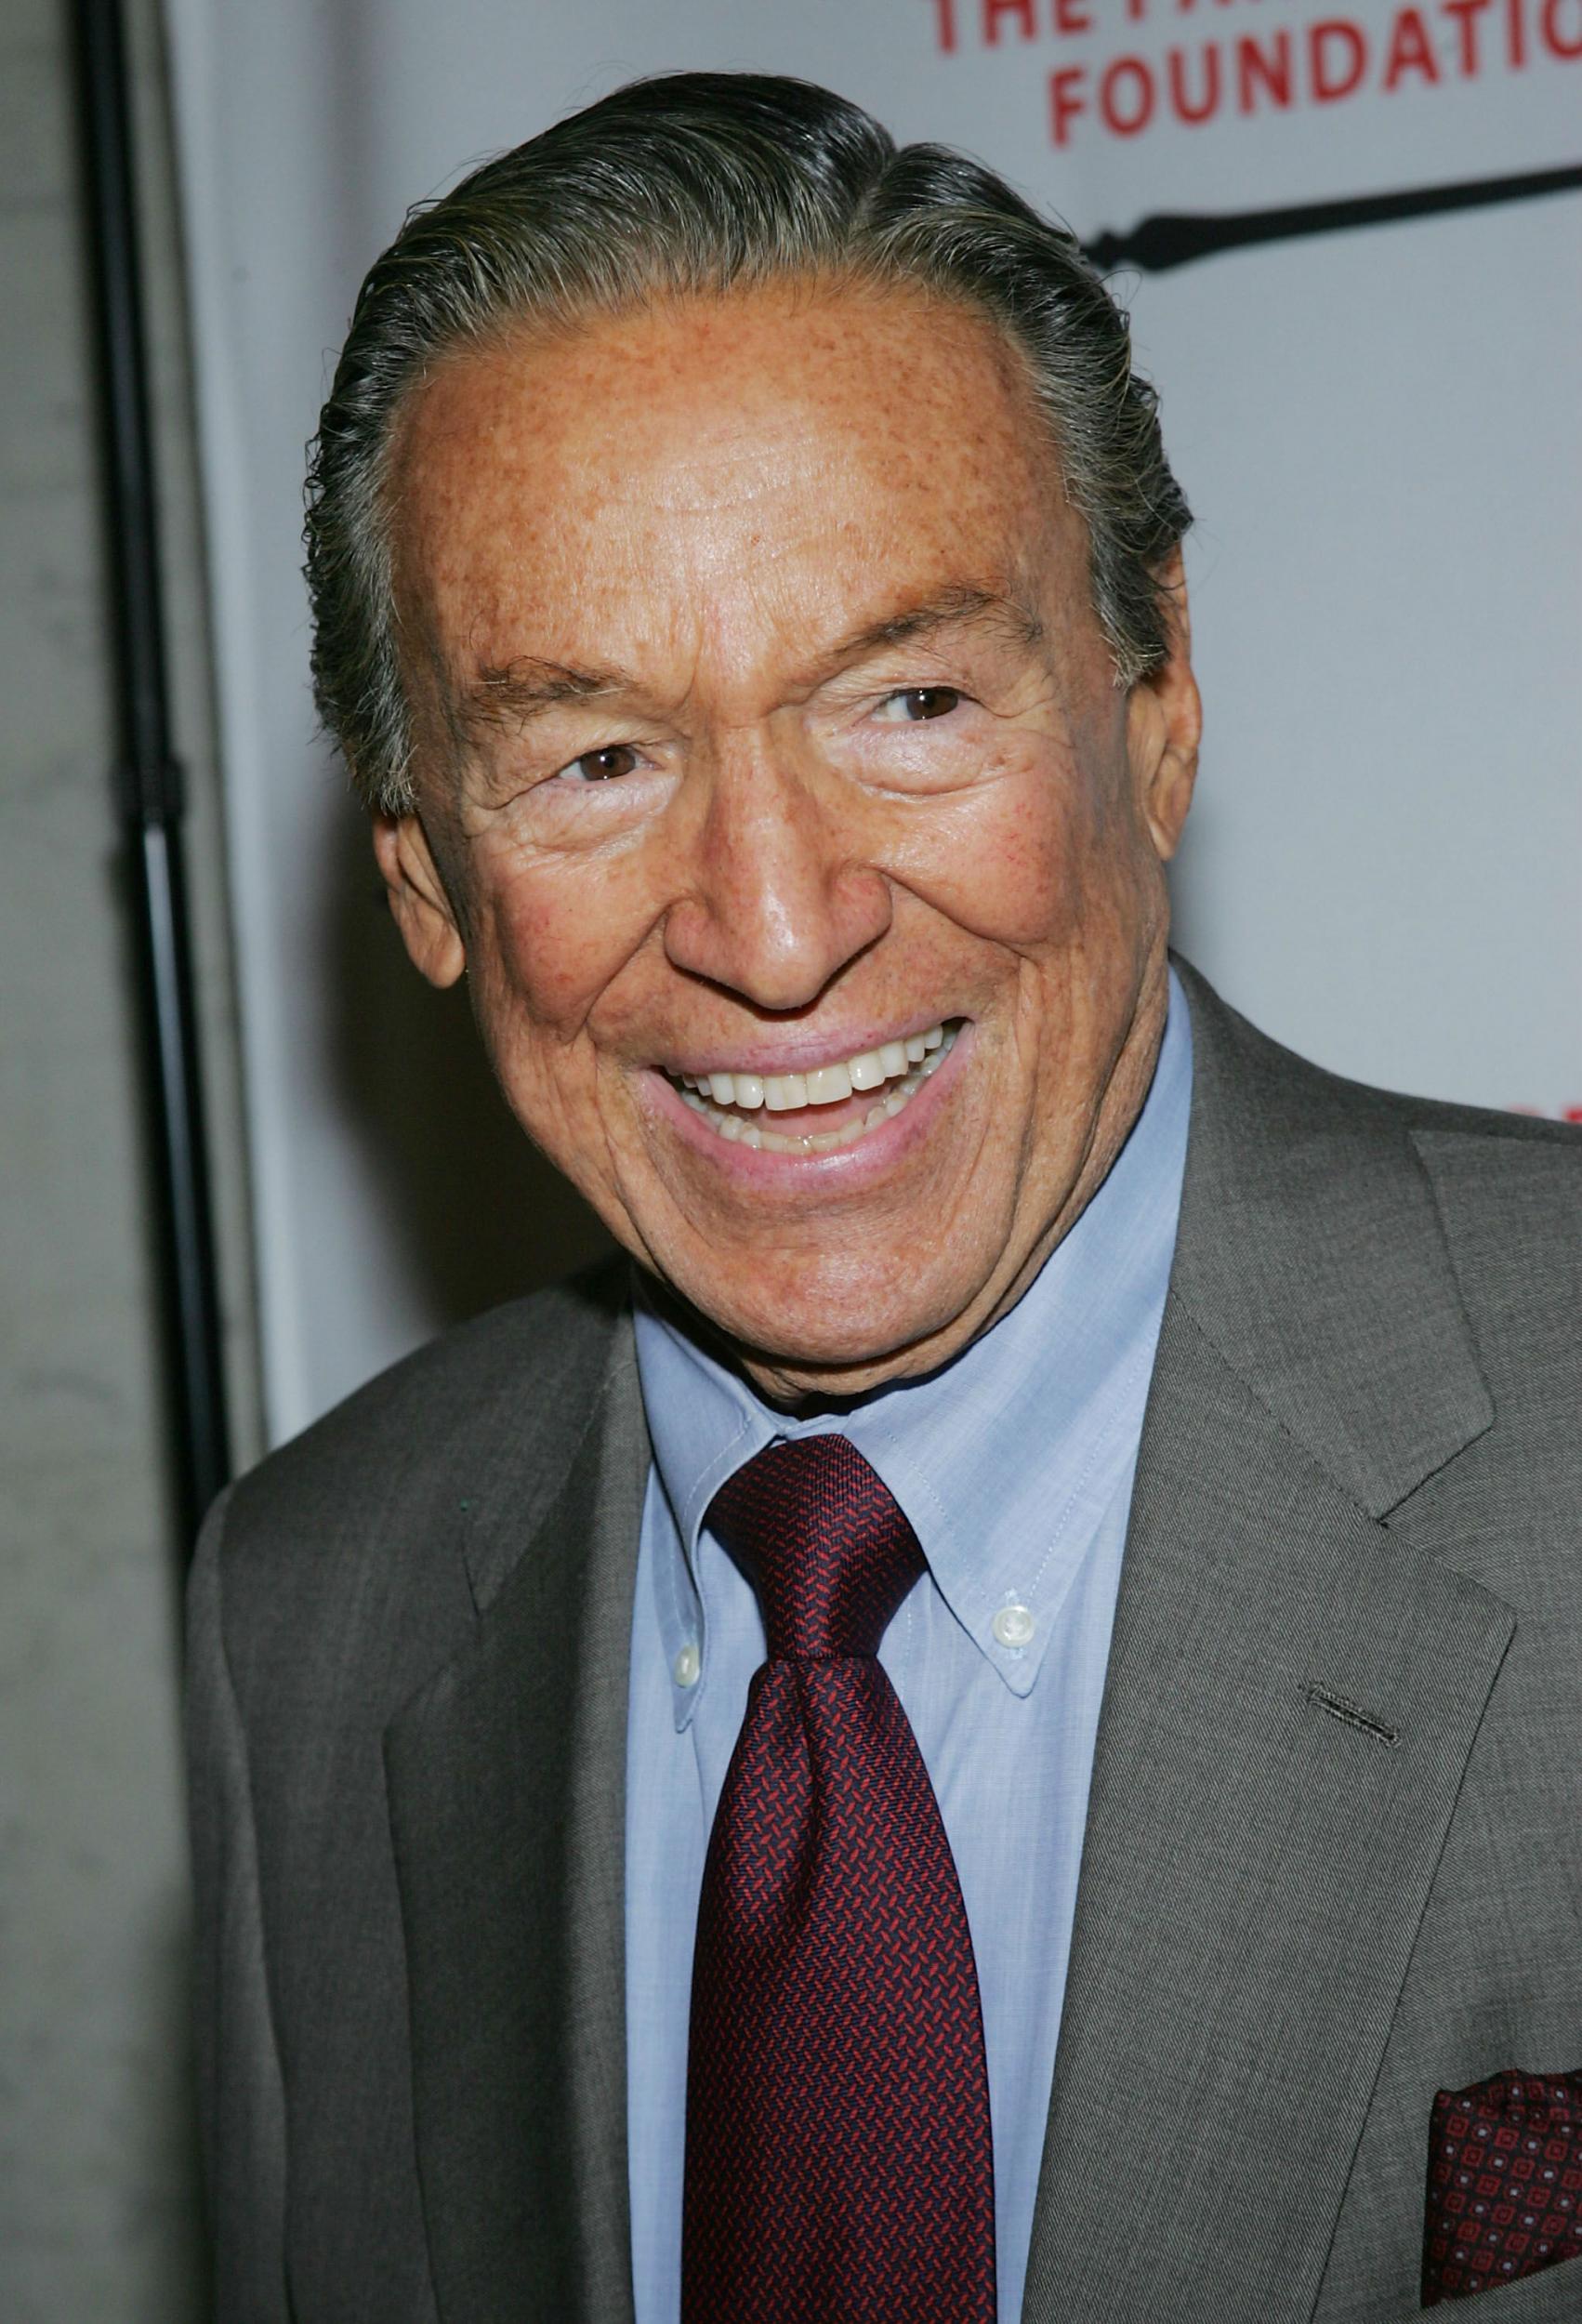 Mike Wallace, who died in 2012 after 60 years with CBS News